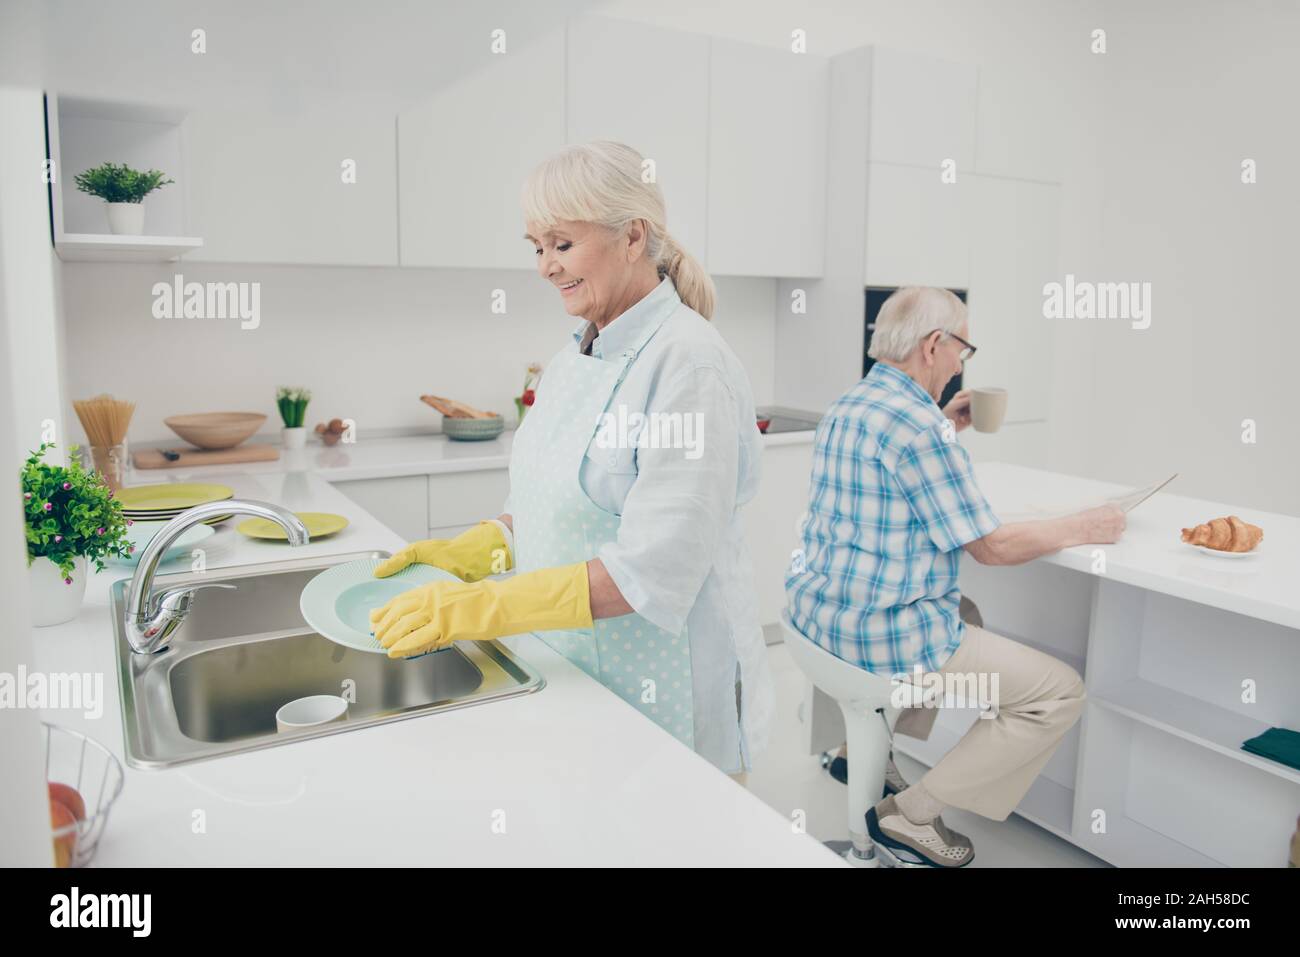 Portrait of nice cute old lady hold hand, polishing drying plates wet hands enjoy house work have kitchenwear stand indoors Stock Photo